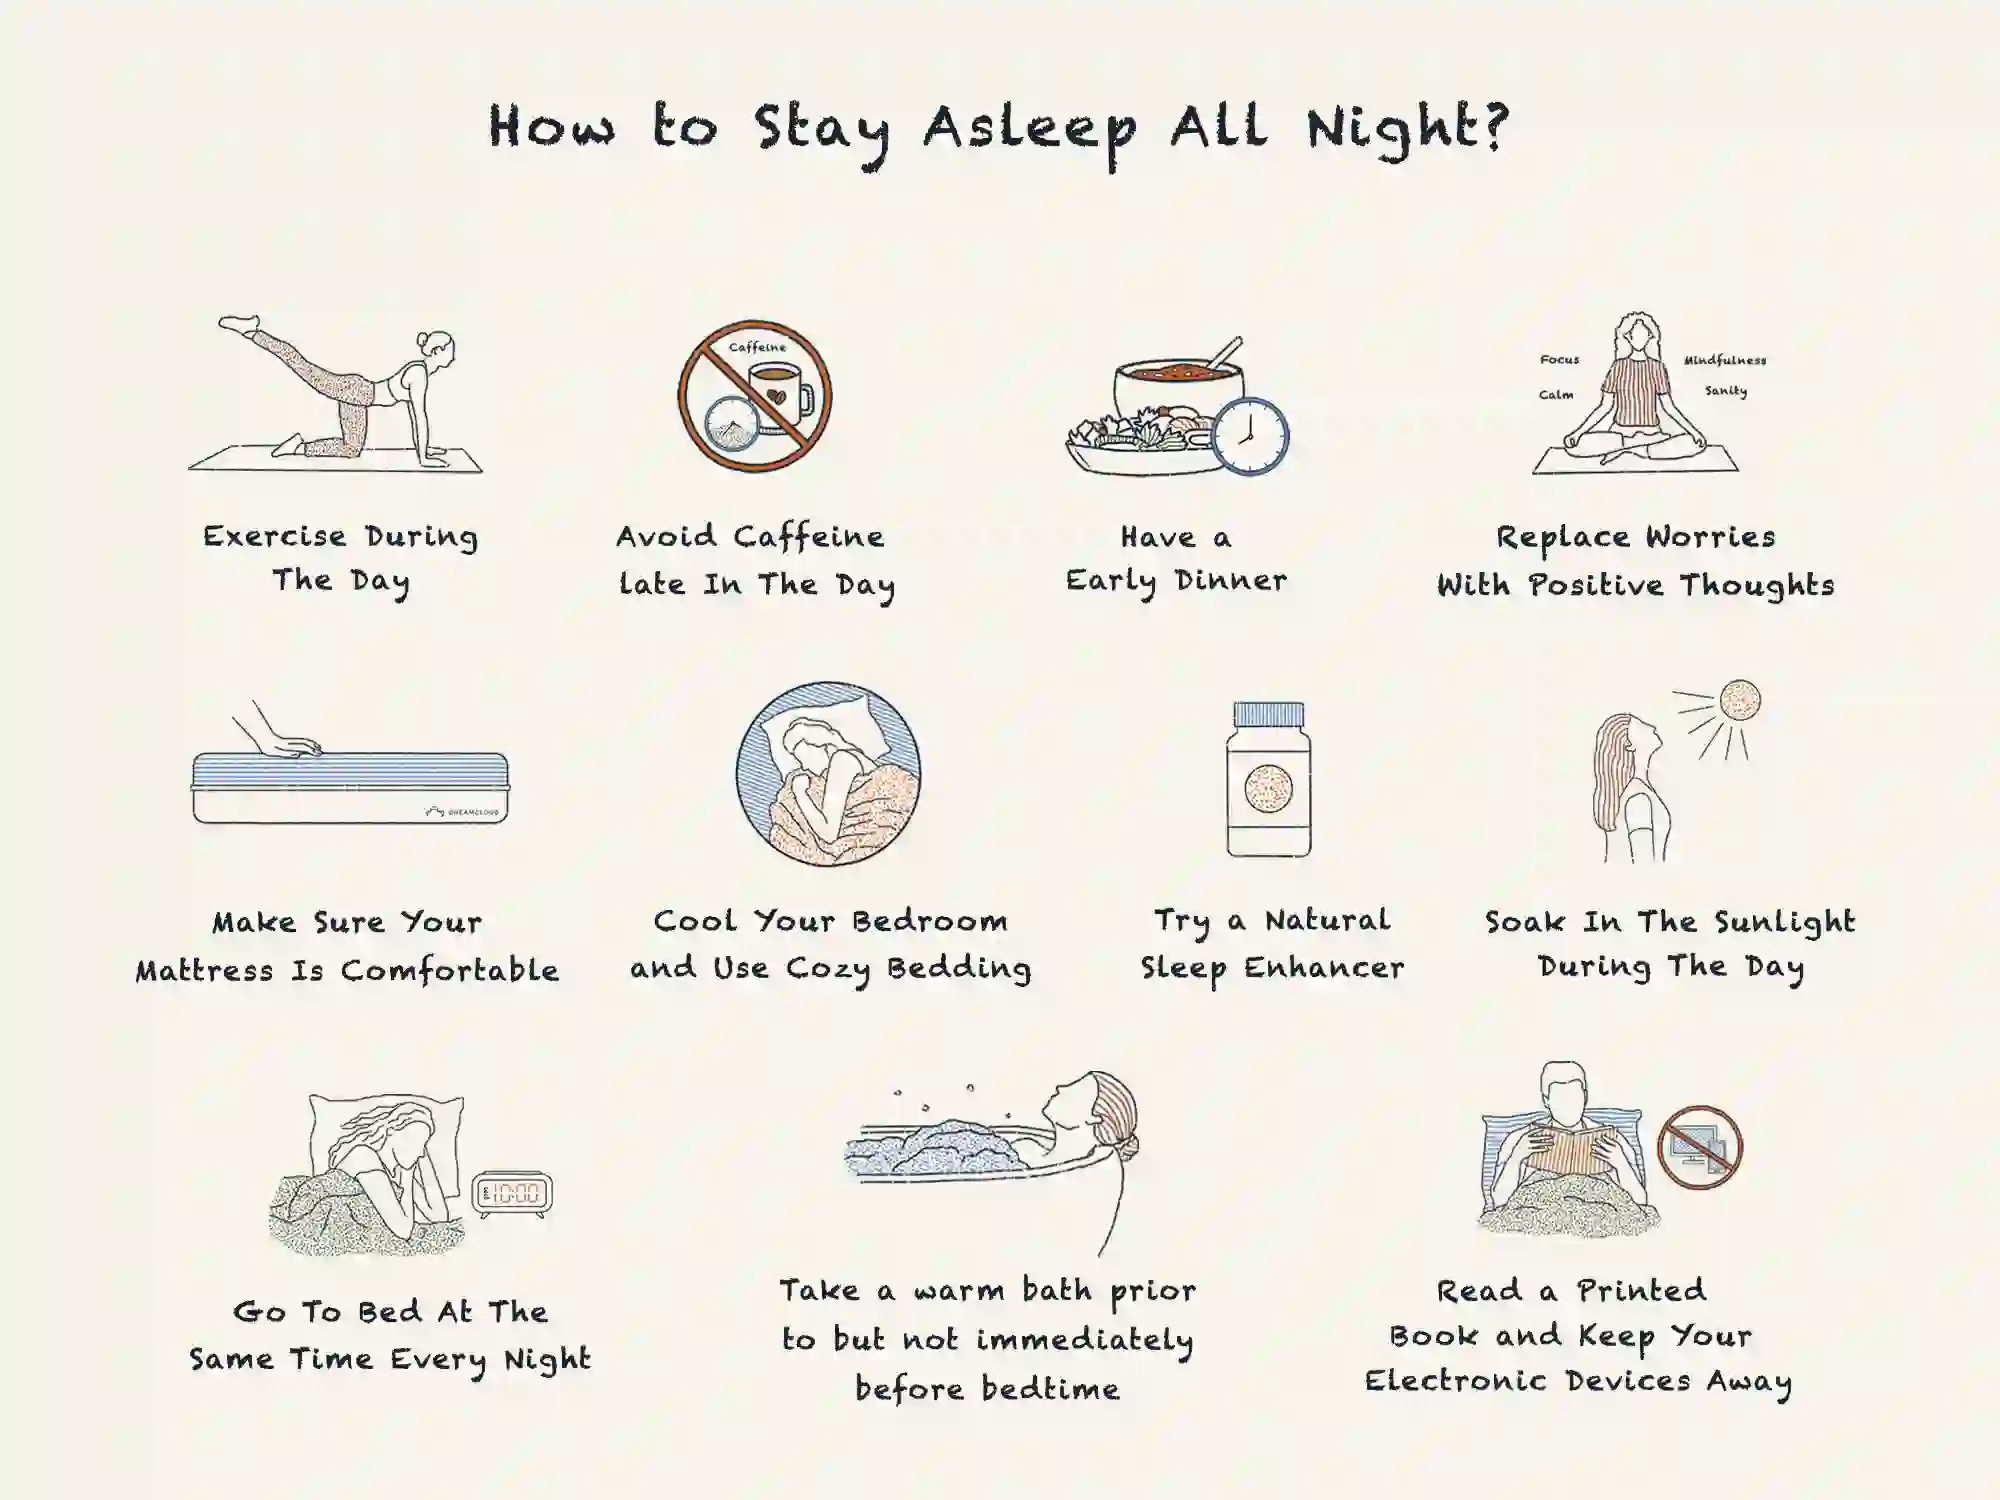 How to Stay Asleep All Night: 11 Easy Tips to Follow